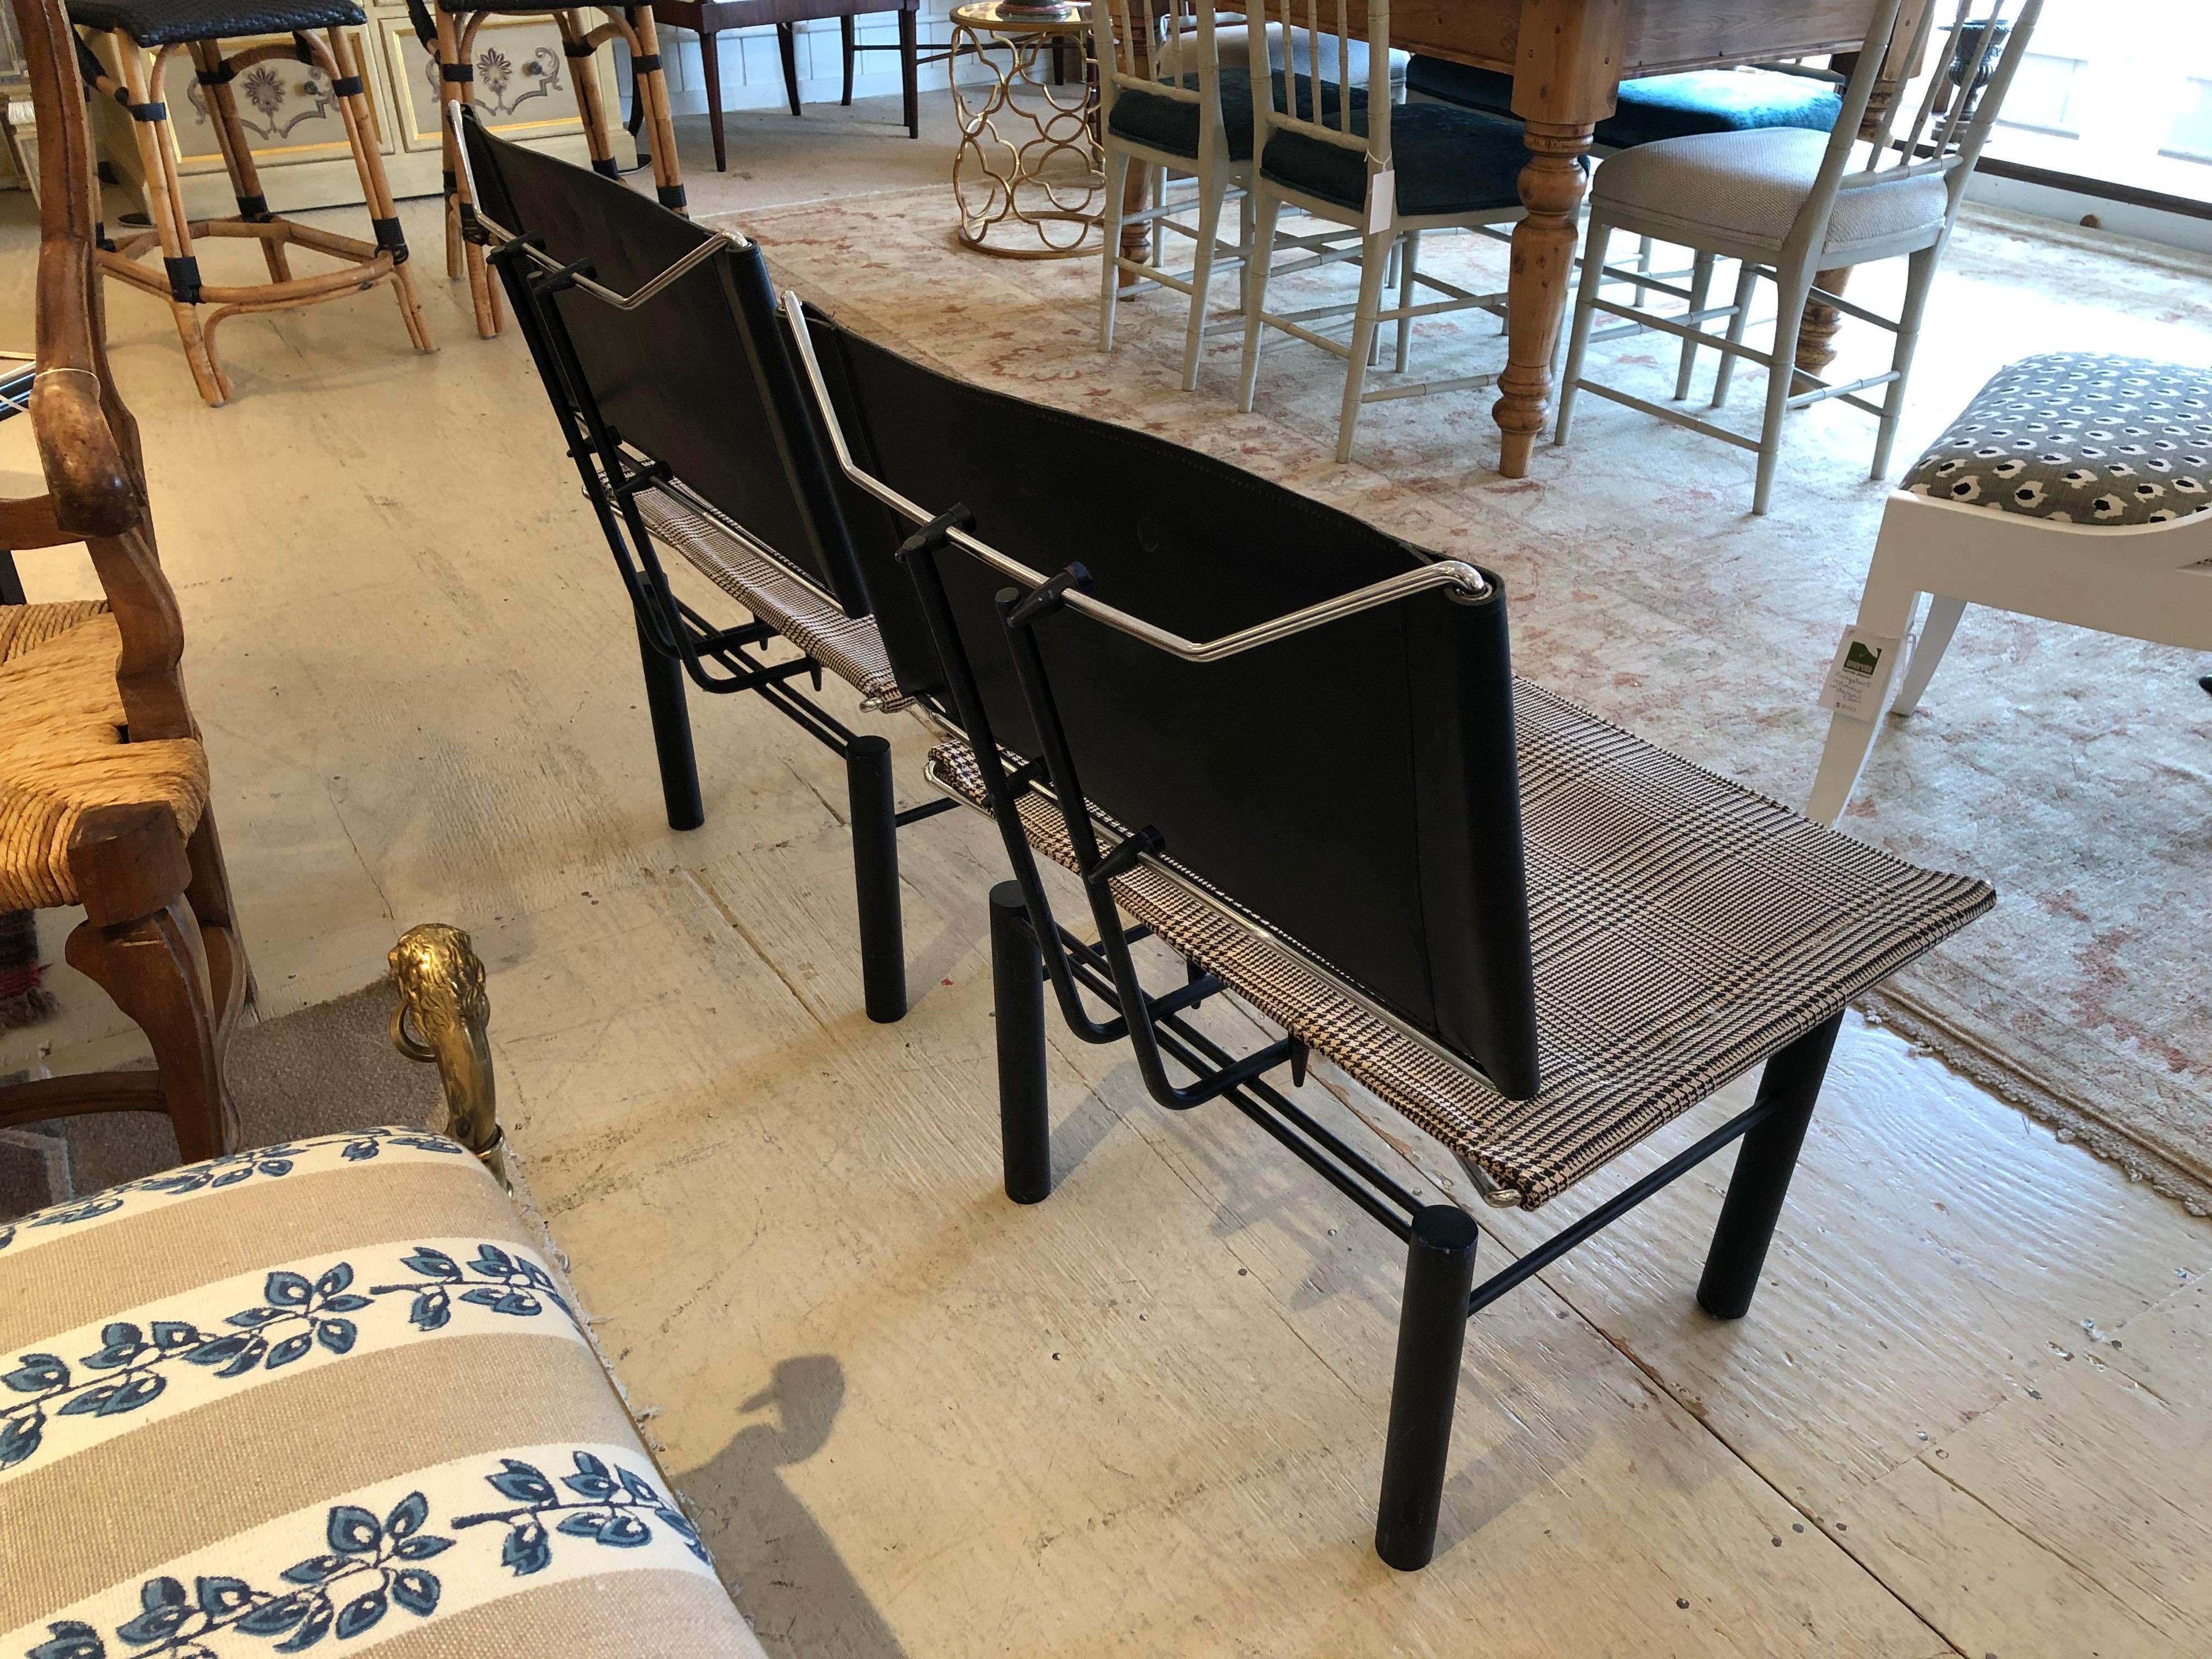 A very unusual super stylish Mid-Century Modern pair of chairs having a space age sleek design mixing chrome, black metal, sling style houndstooth fabric seats and black saddle leather backs. A rare and fascinating find.